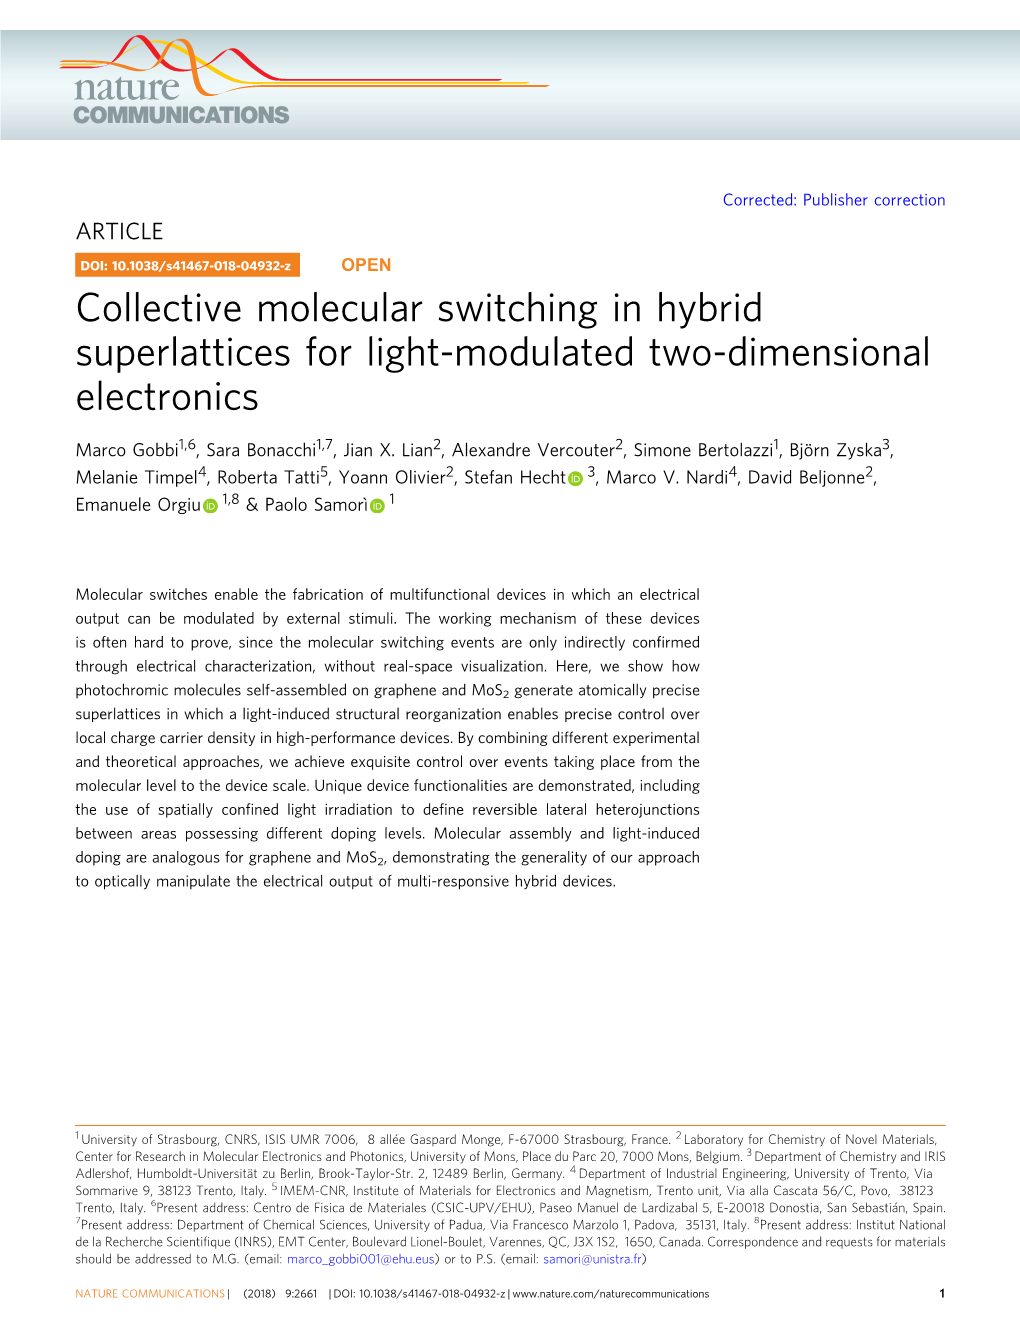 Collective Molecular Switching in Hybrid Superlattices for Light-Modulated Two-Dimensional Electronics